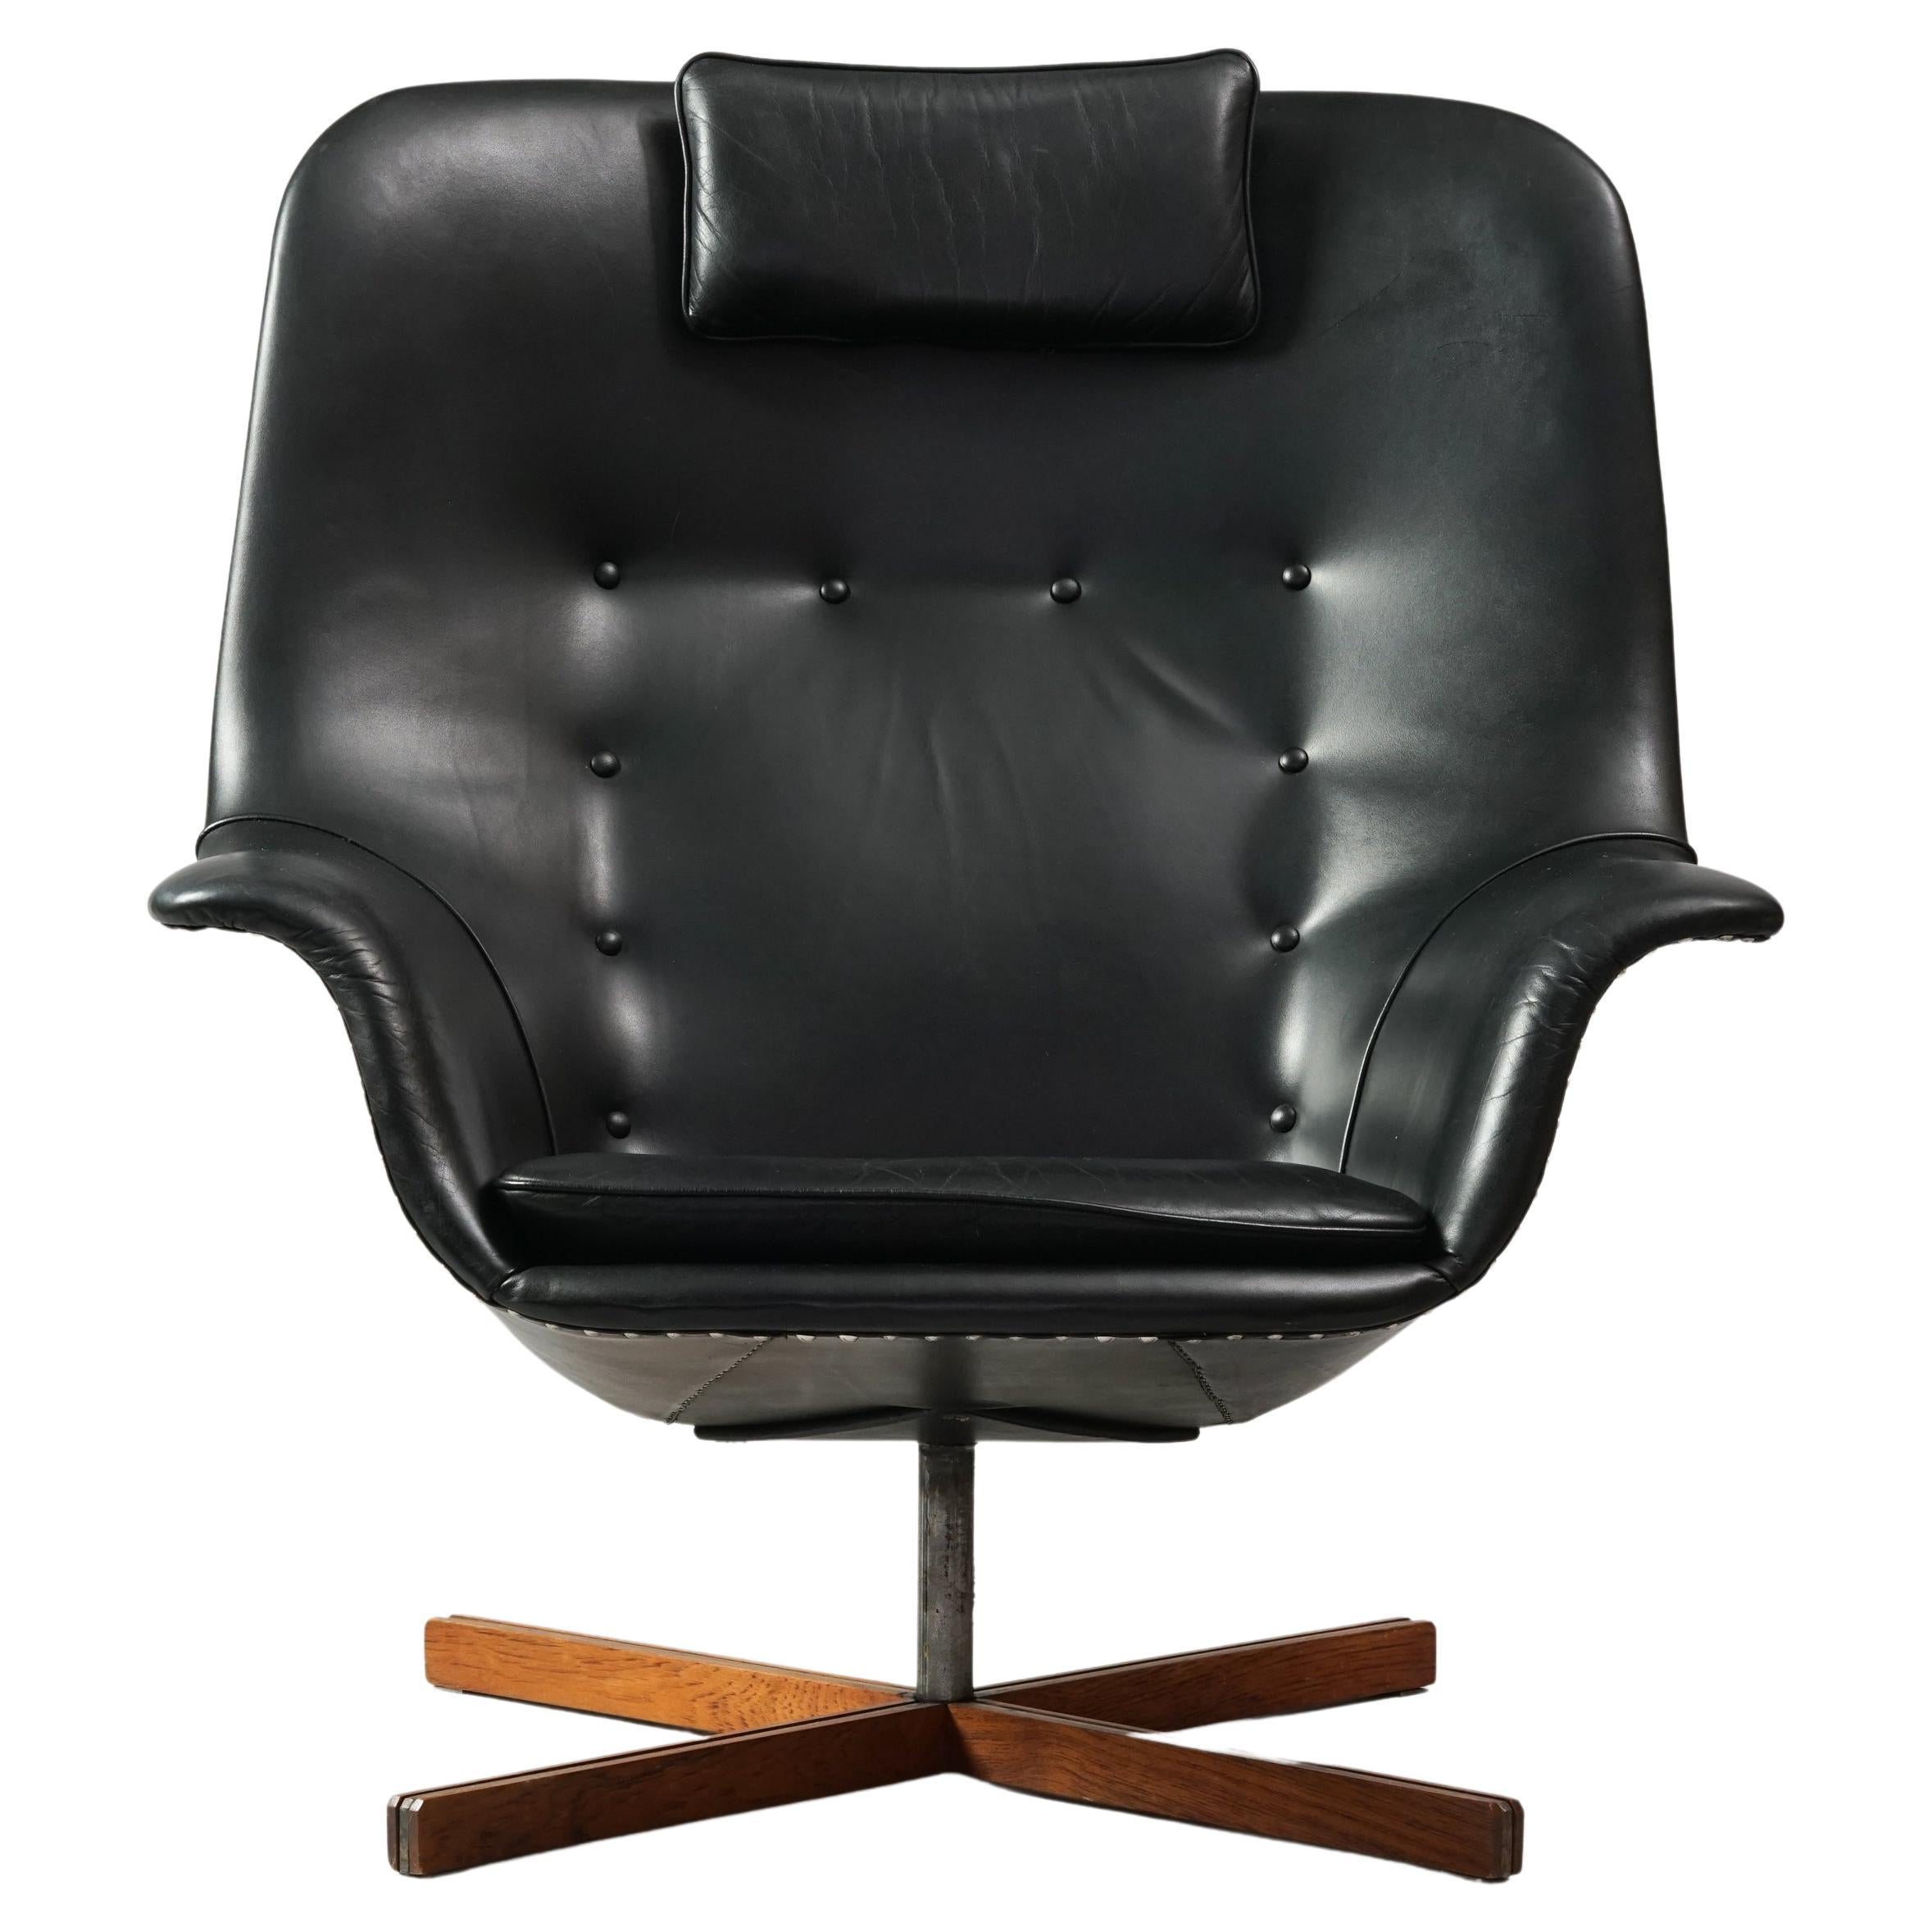 Model Mandariini lounge chair by Carl Gustaf Hiort af Ornäs for Puunveisto Oy from the 1960s. Leather seating, teak leg. Good vintage condition, minor wear consistent with age and use. Iconic Hiort af Ornäs piece of furniture.